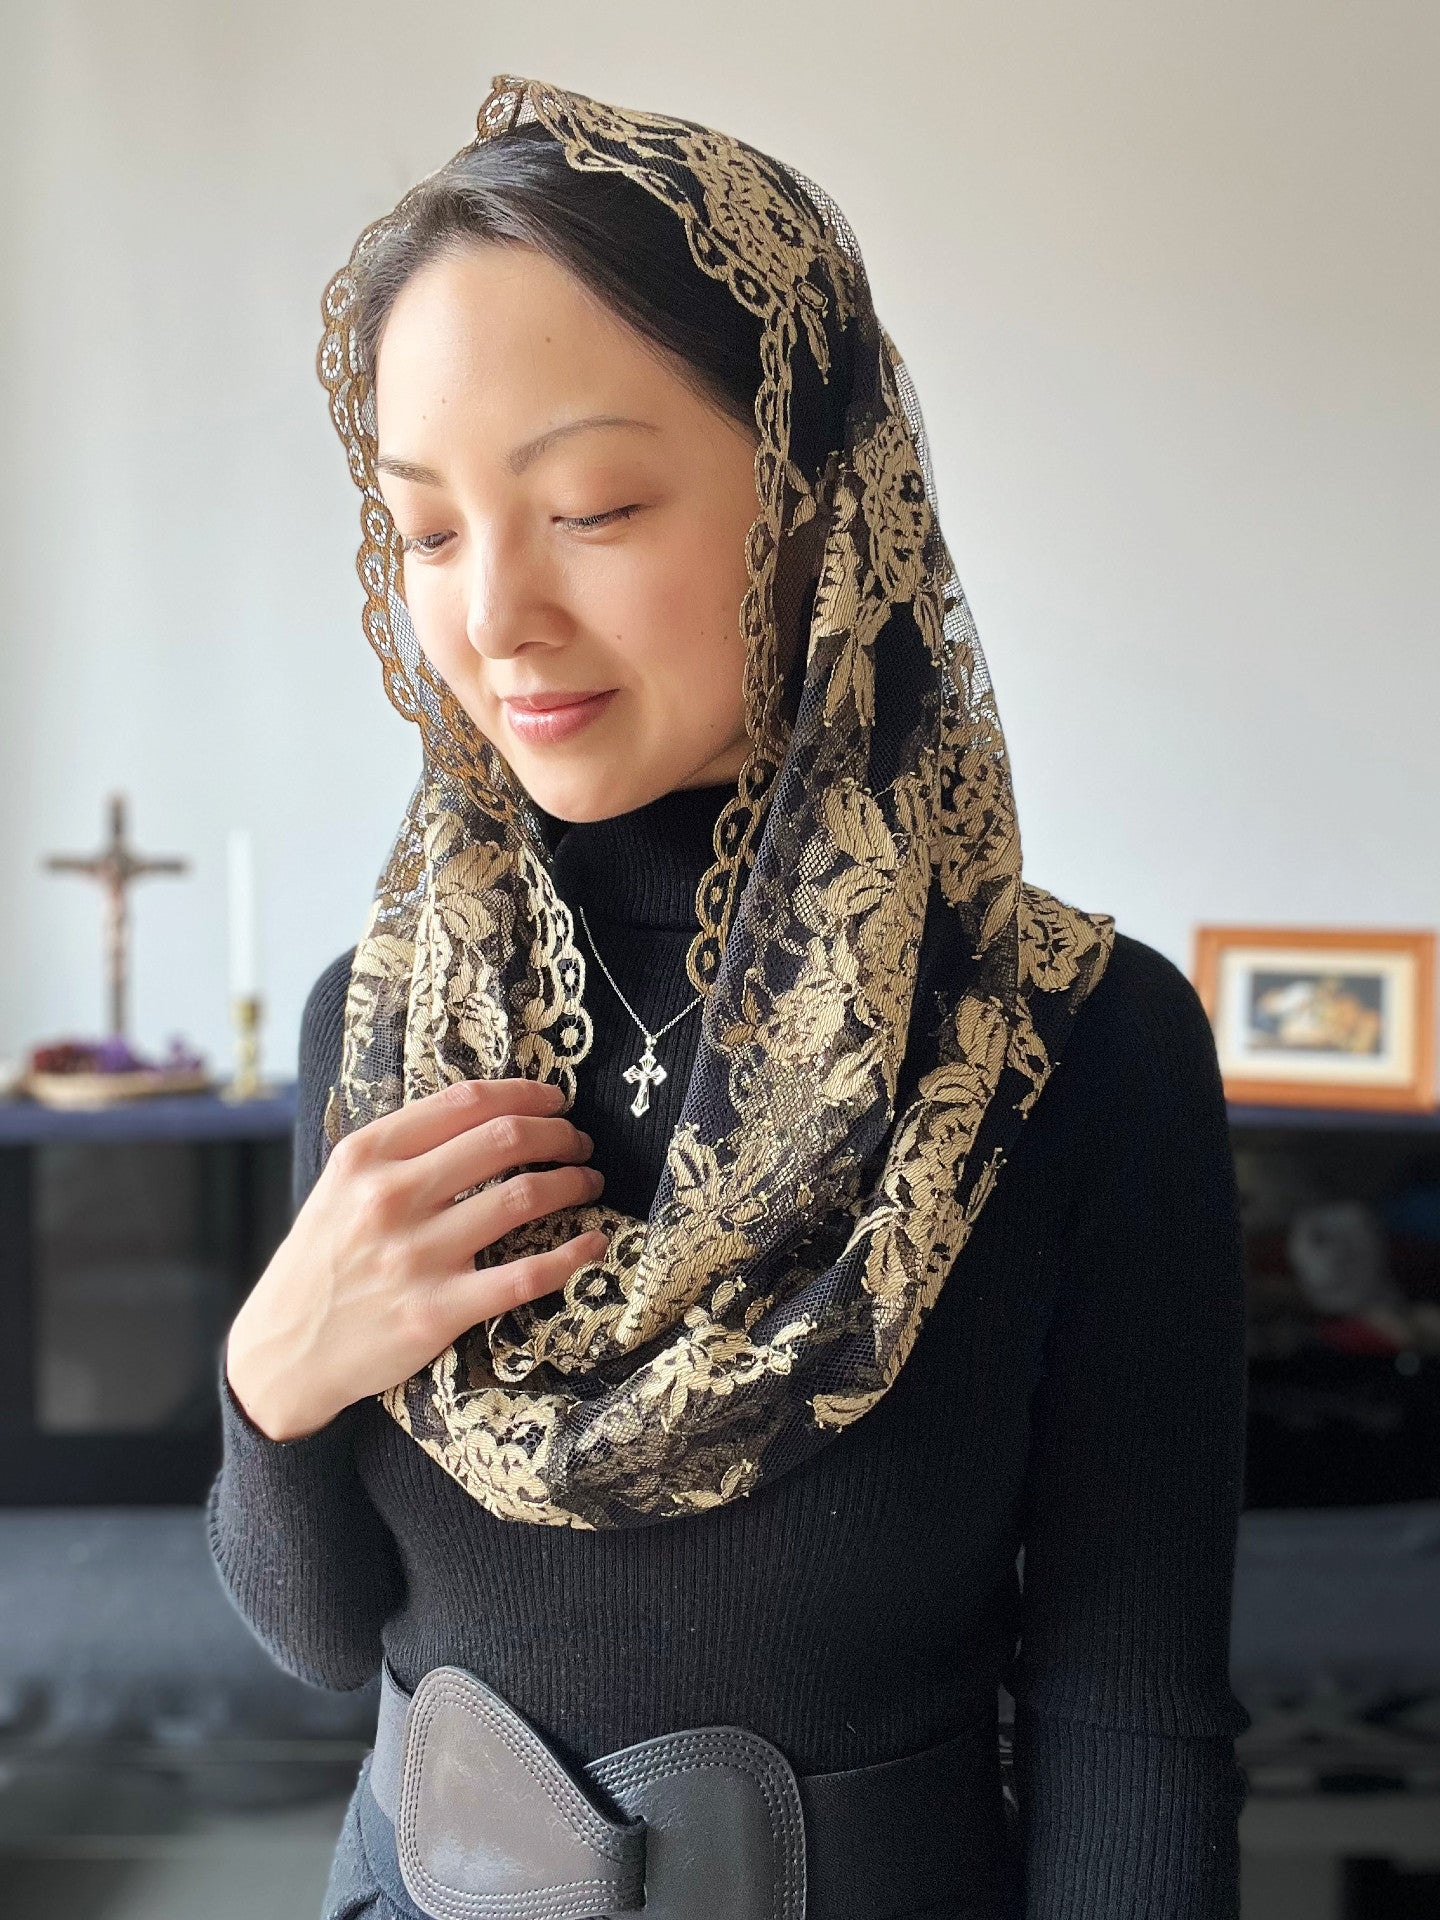 PRE-ORDER "Mother of Confessors" Chantilly Lace Infinity Veil (Black & Gold)